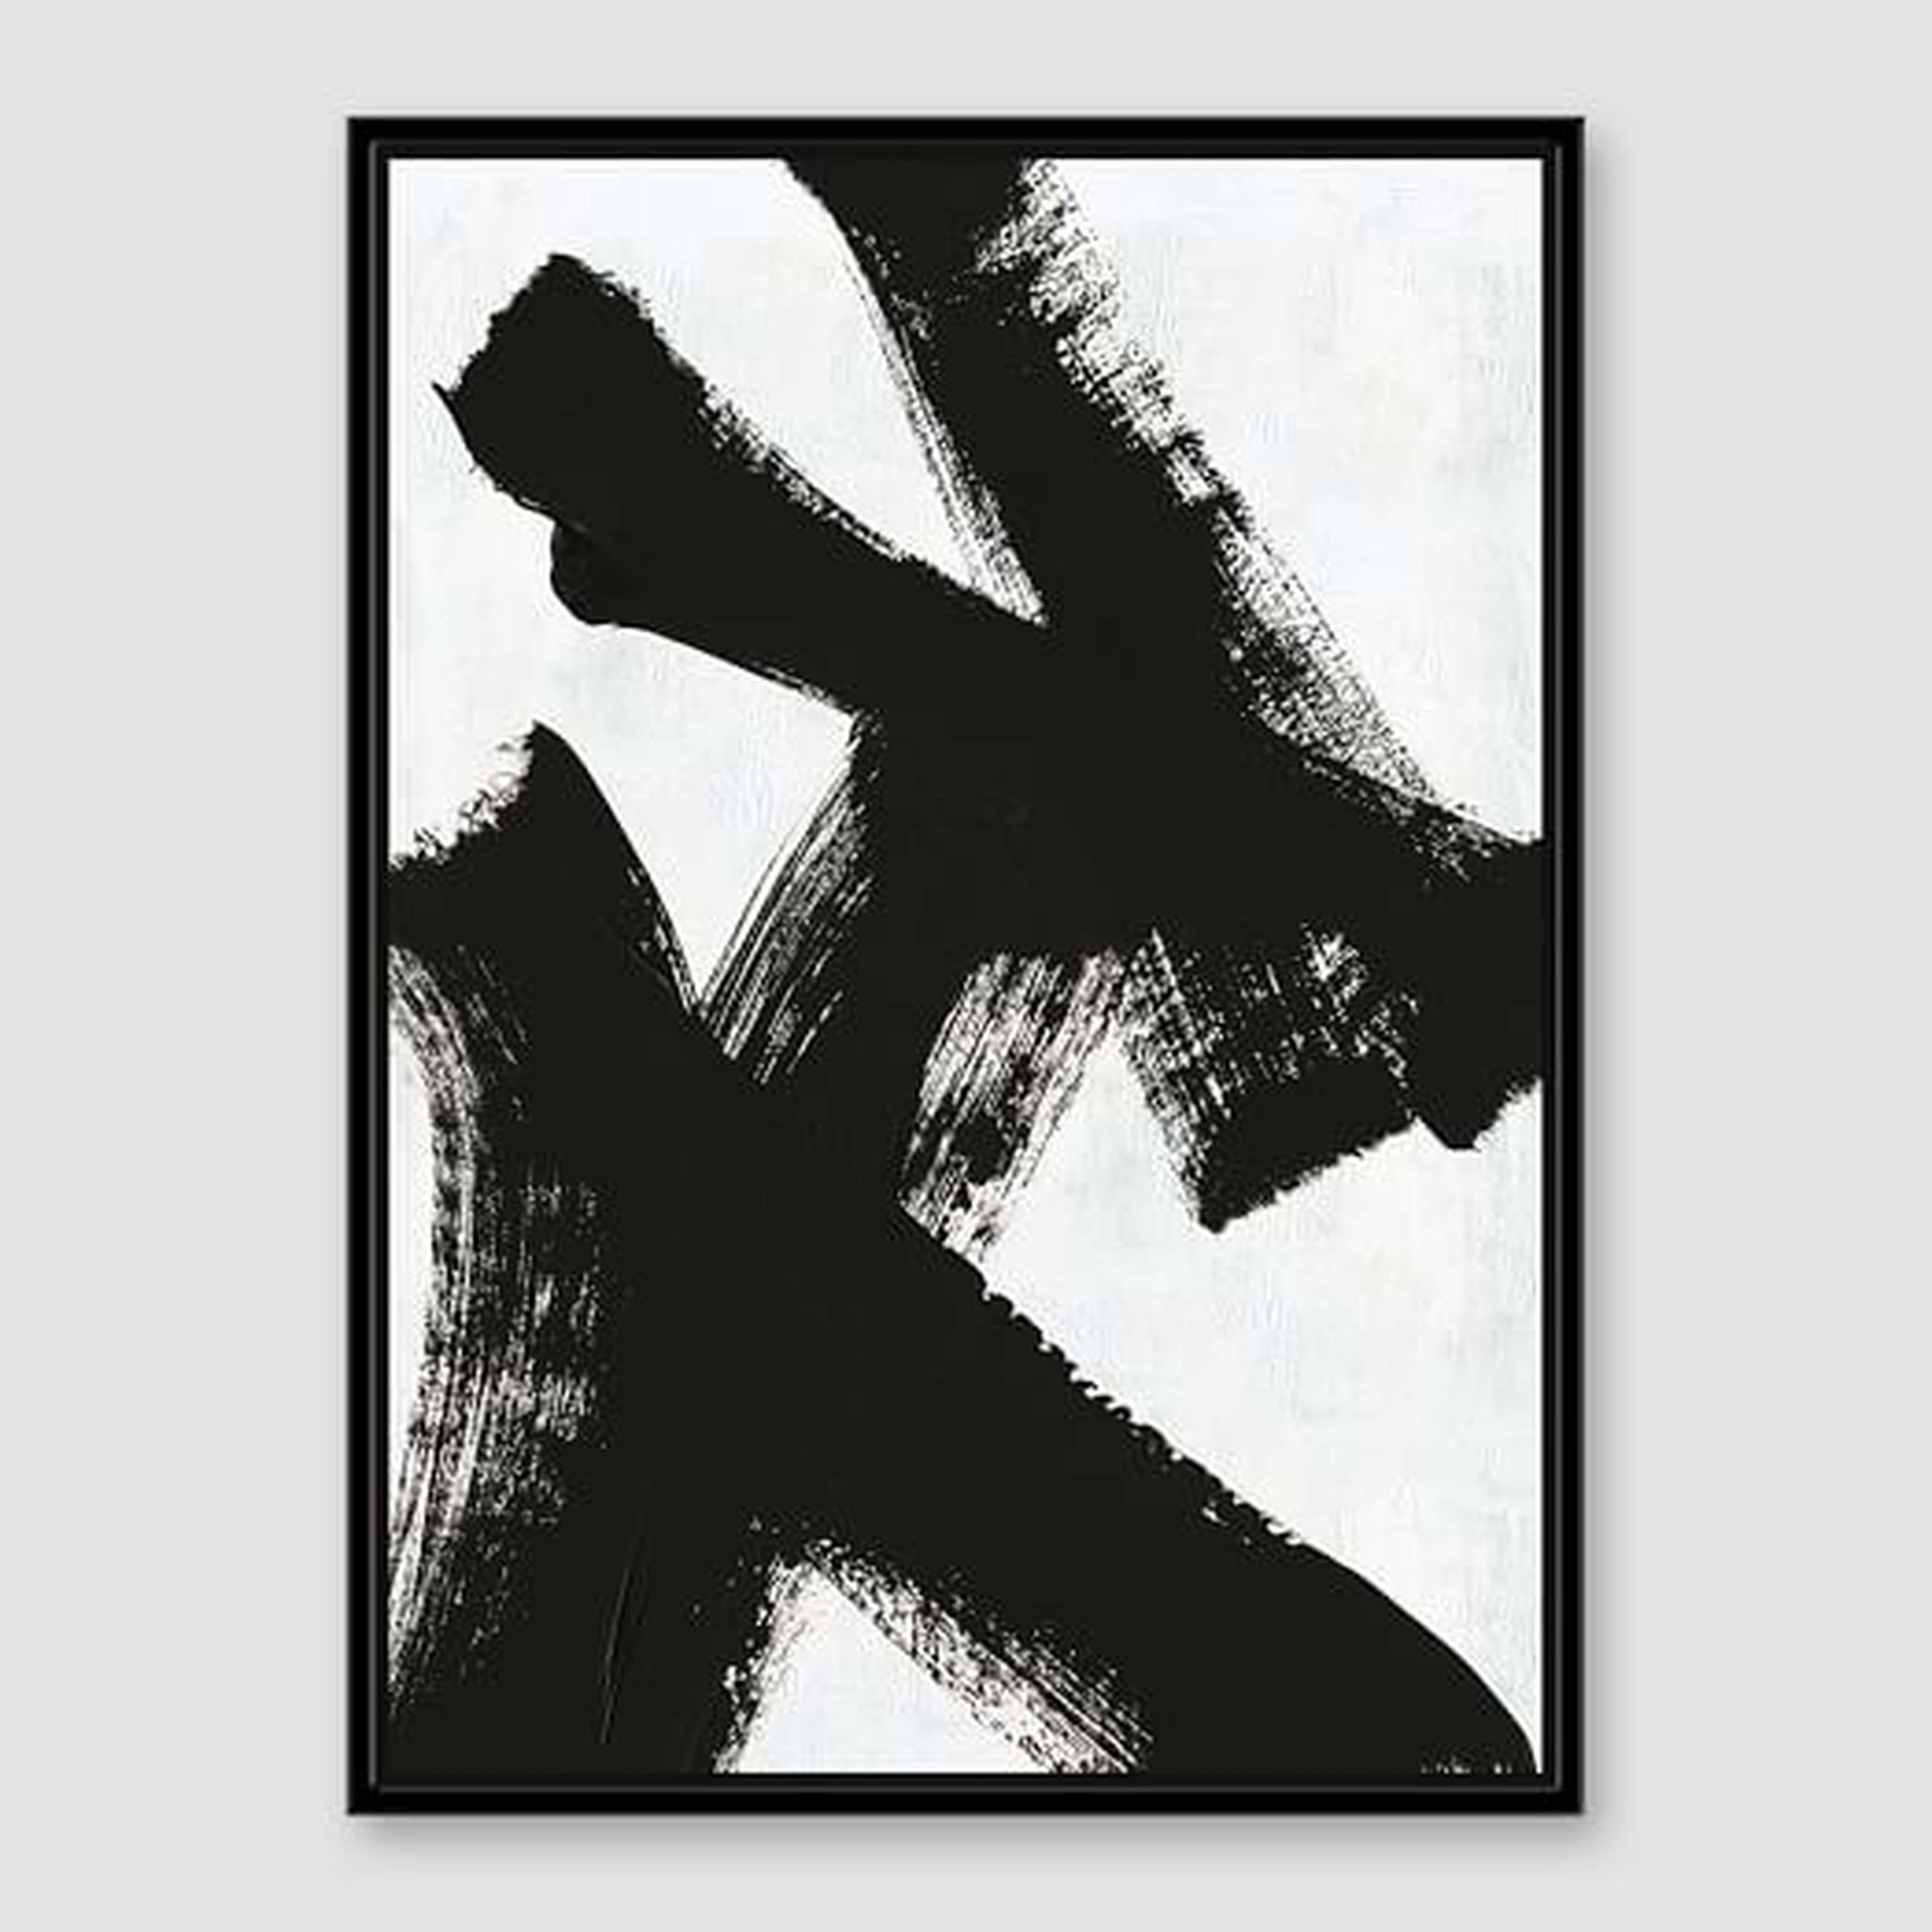 Framed Prints - Abstract Ink Brush Double XX - West Elm